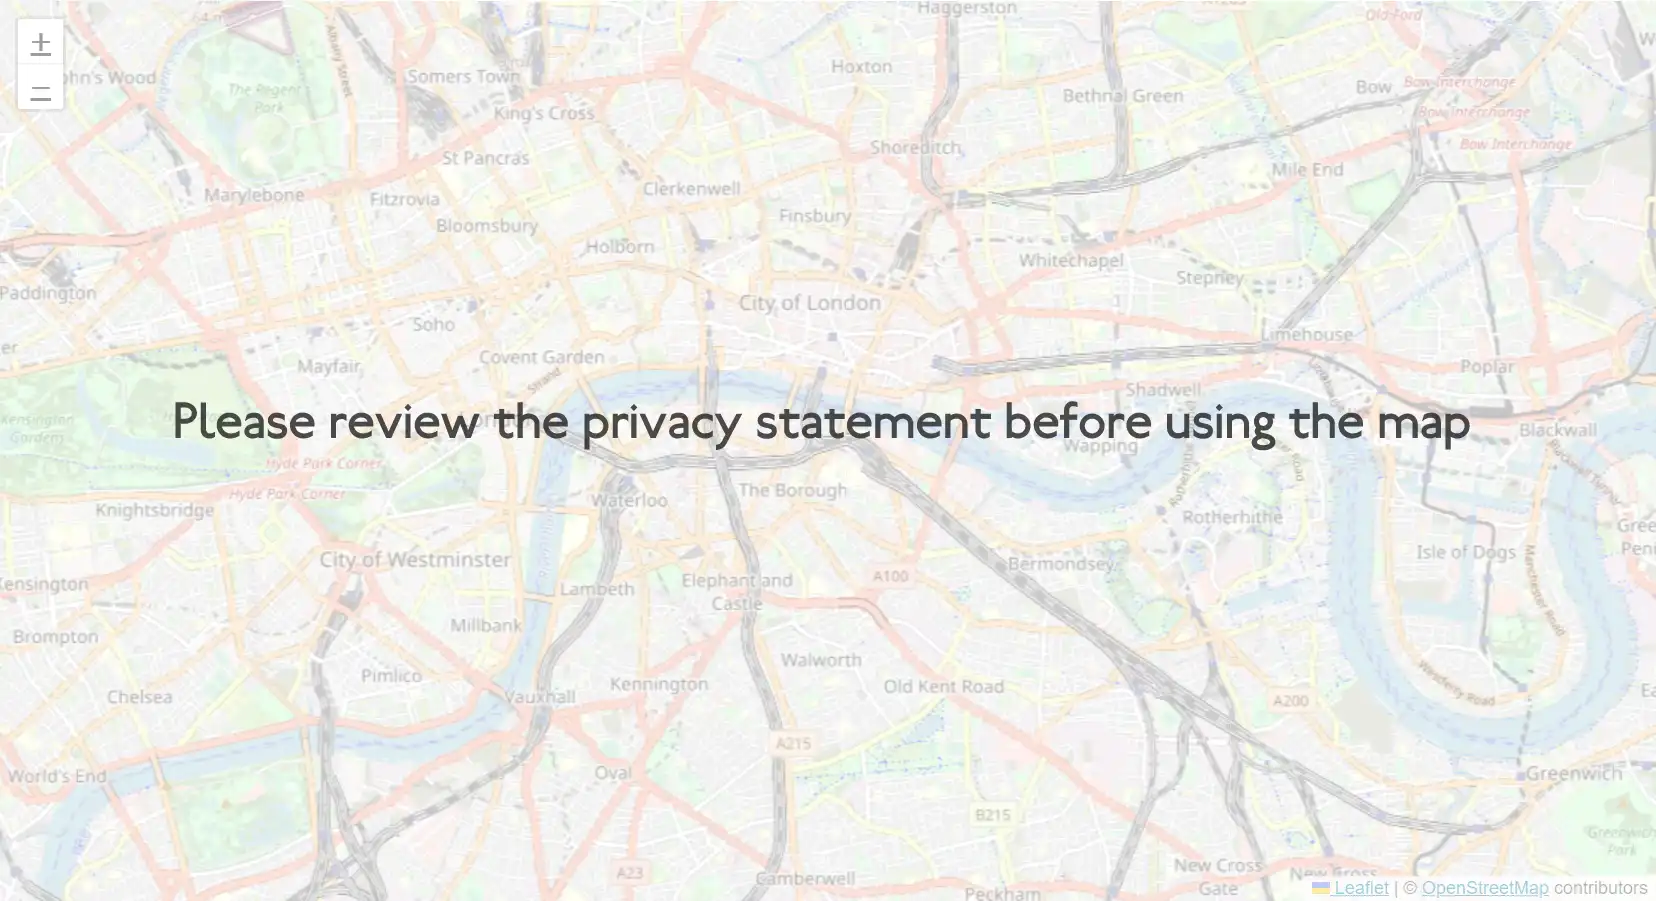 A map control image with privacy hint: Please review the privacy statement before using the map